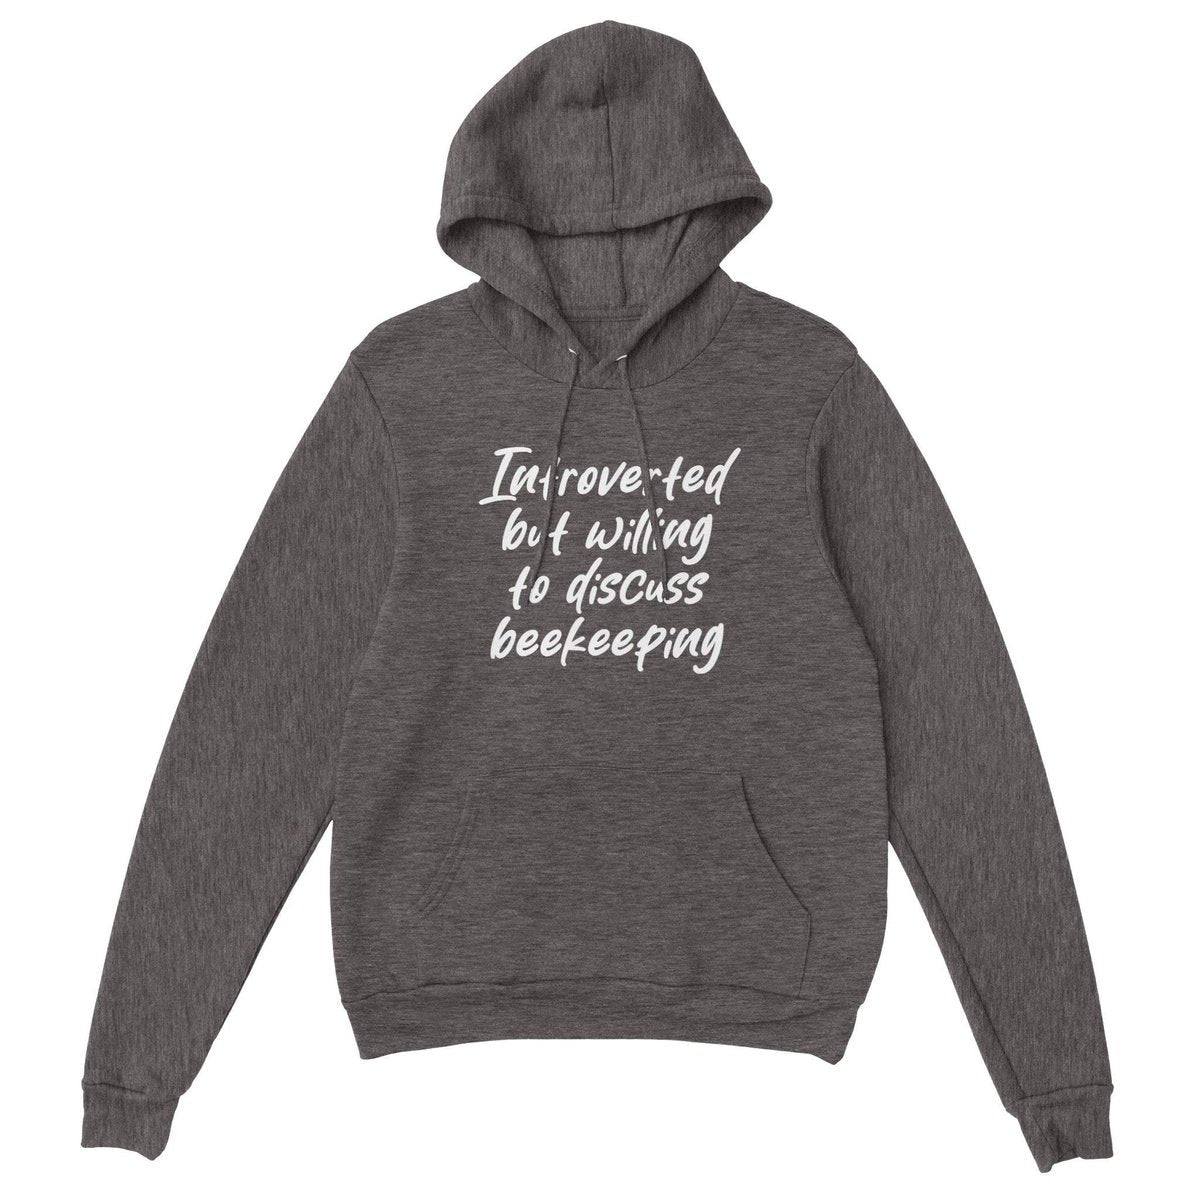 Introverted but willing to discuss beekeeping Hoodie - Premium Unisex Pullover Hoodie Australia Online Color Charcoal Heather / XS